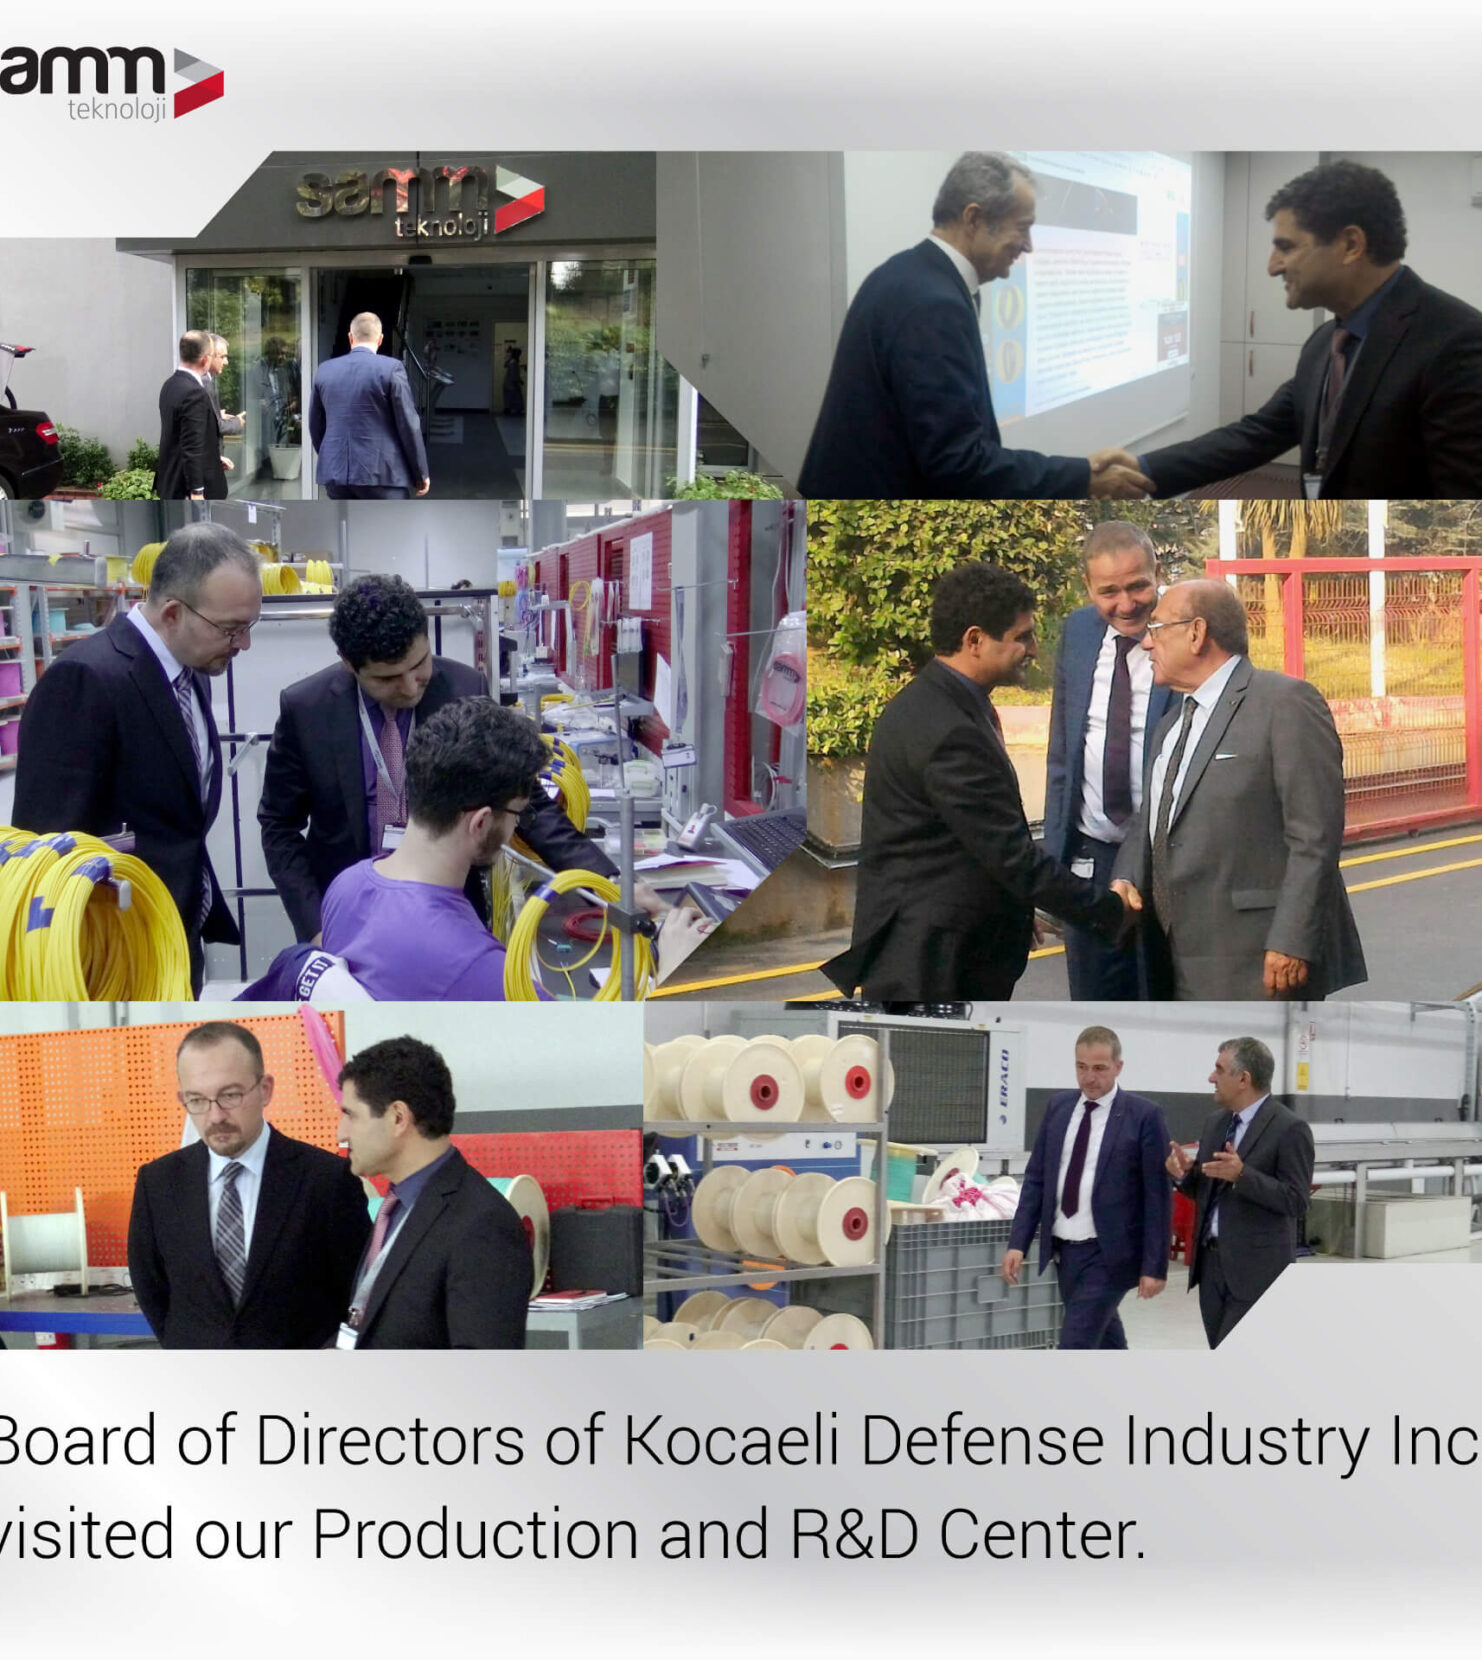 The Board of Directors of Kocaeli Defense Industry Inc.visited our Production and R&D Center.